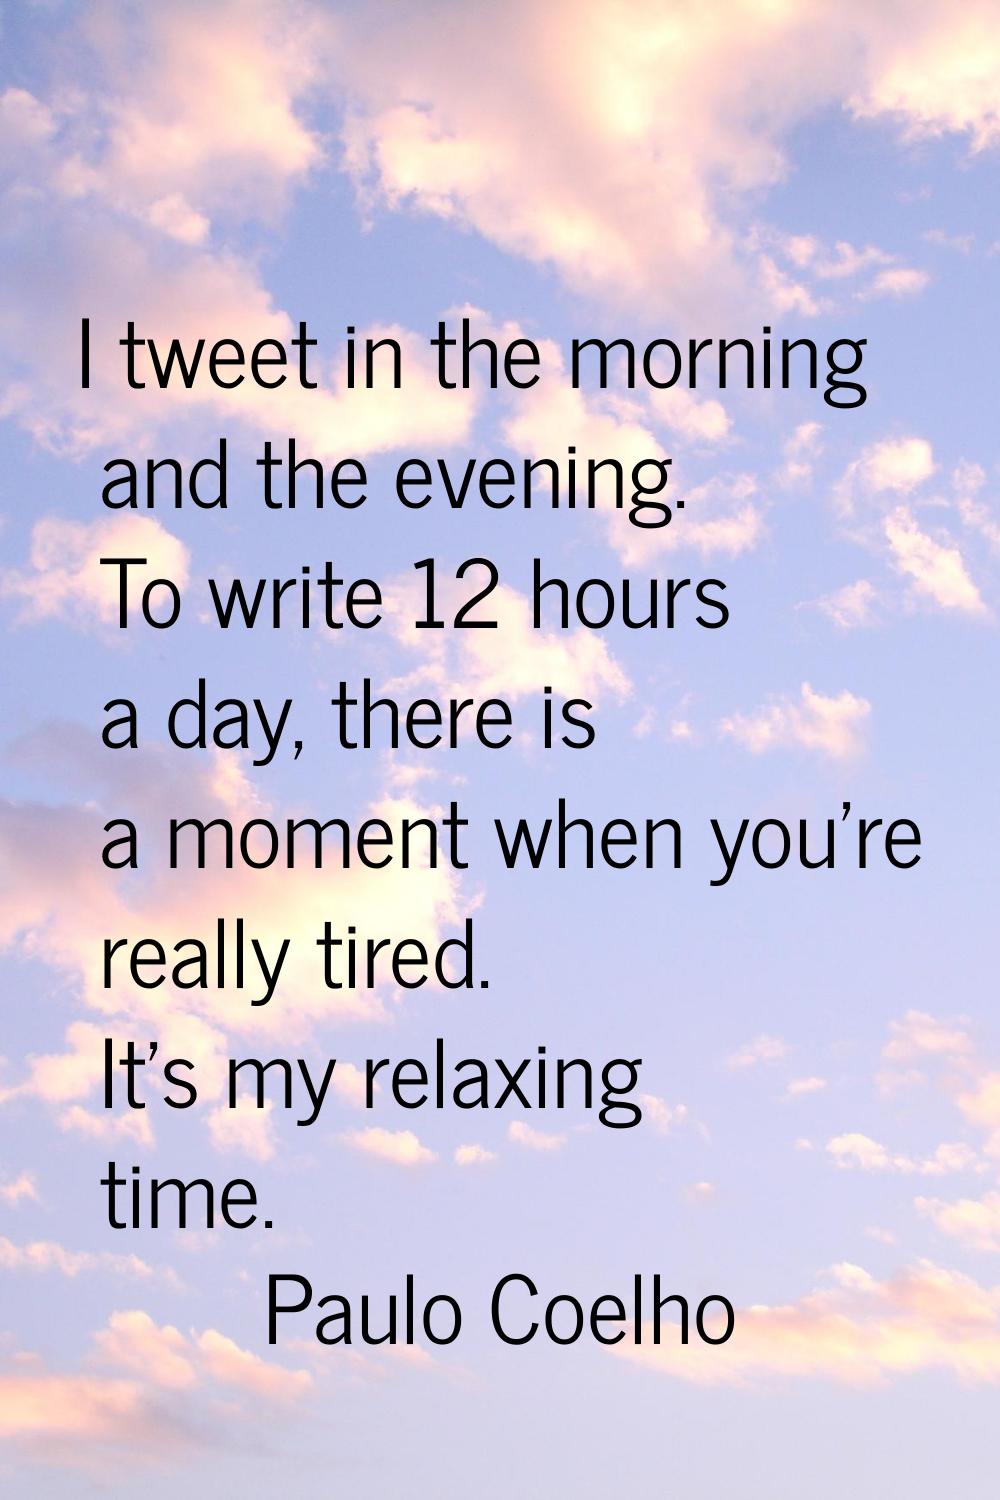 I tweet in the morning and the evening. To write 12 hours a day, there is a moment when you're real